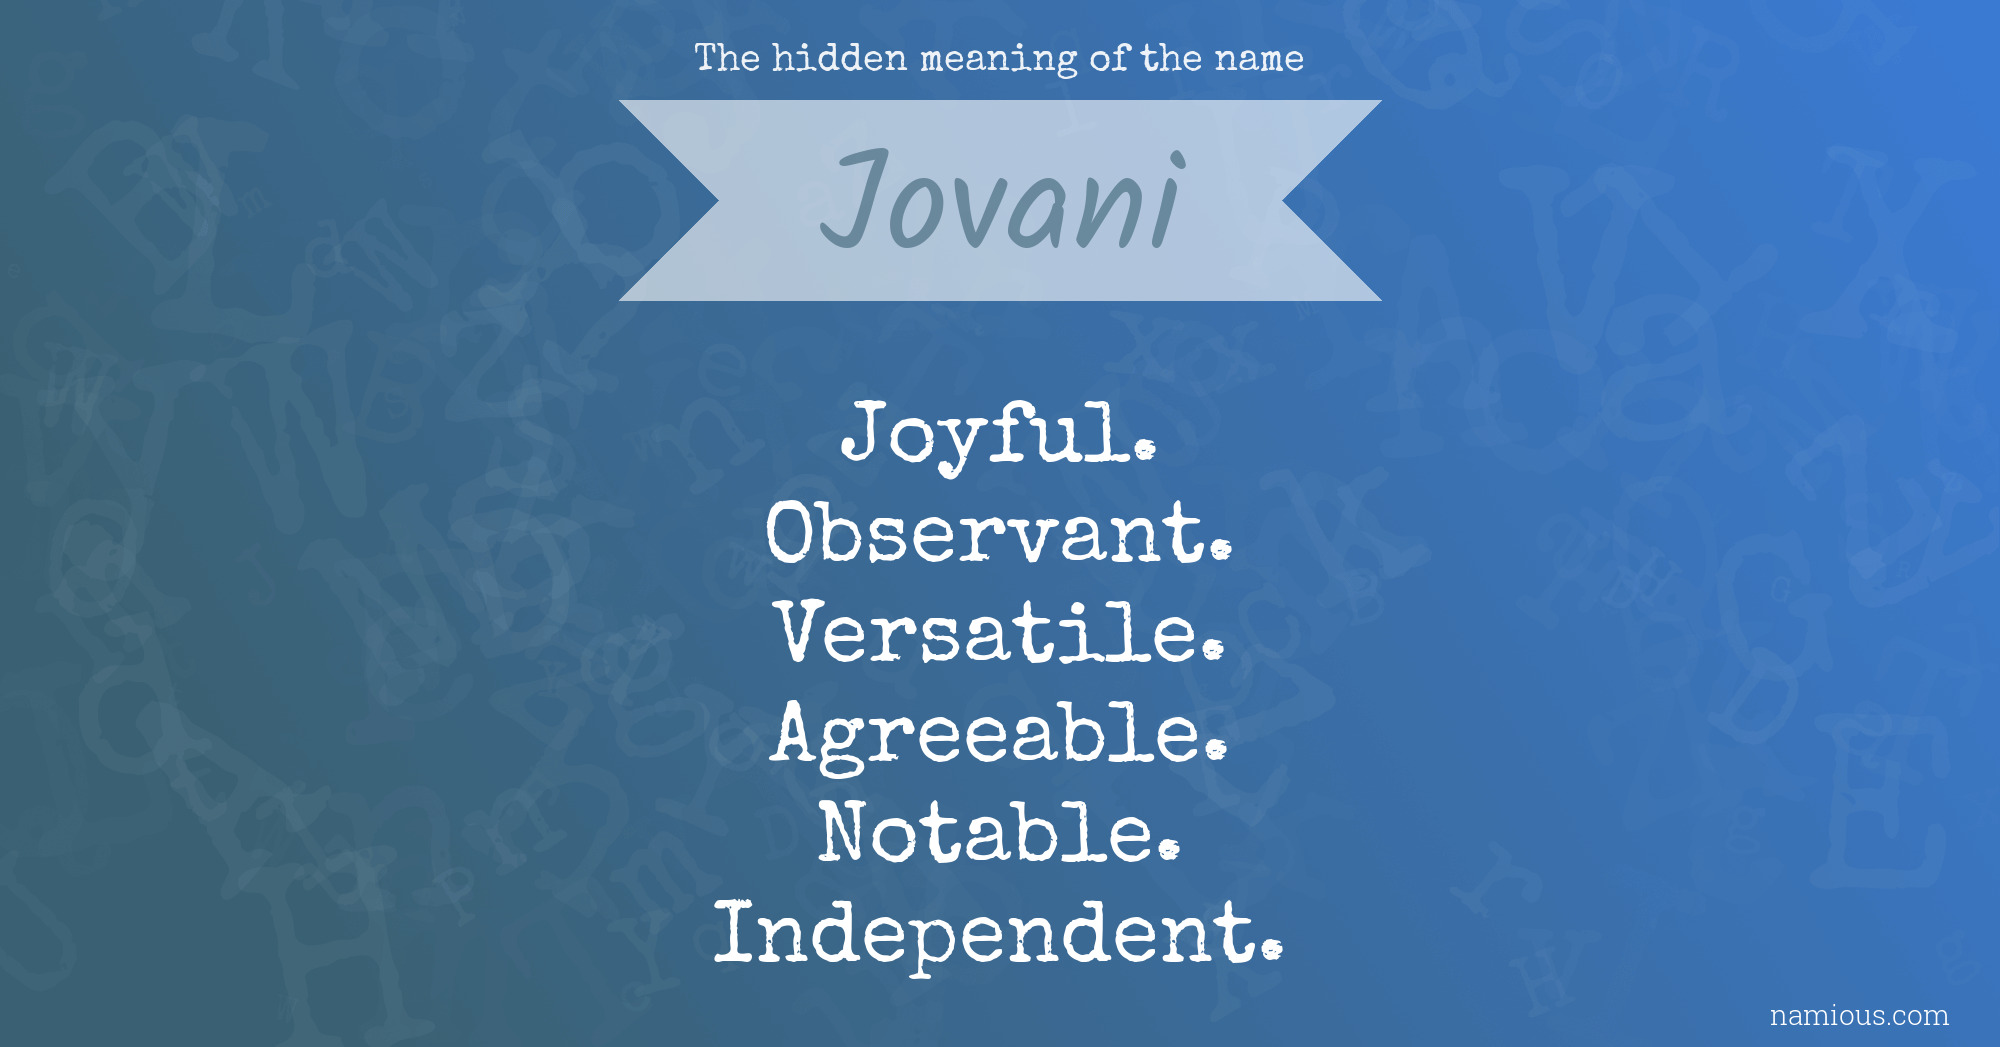 The hidden meaning of the name Jovani